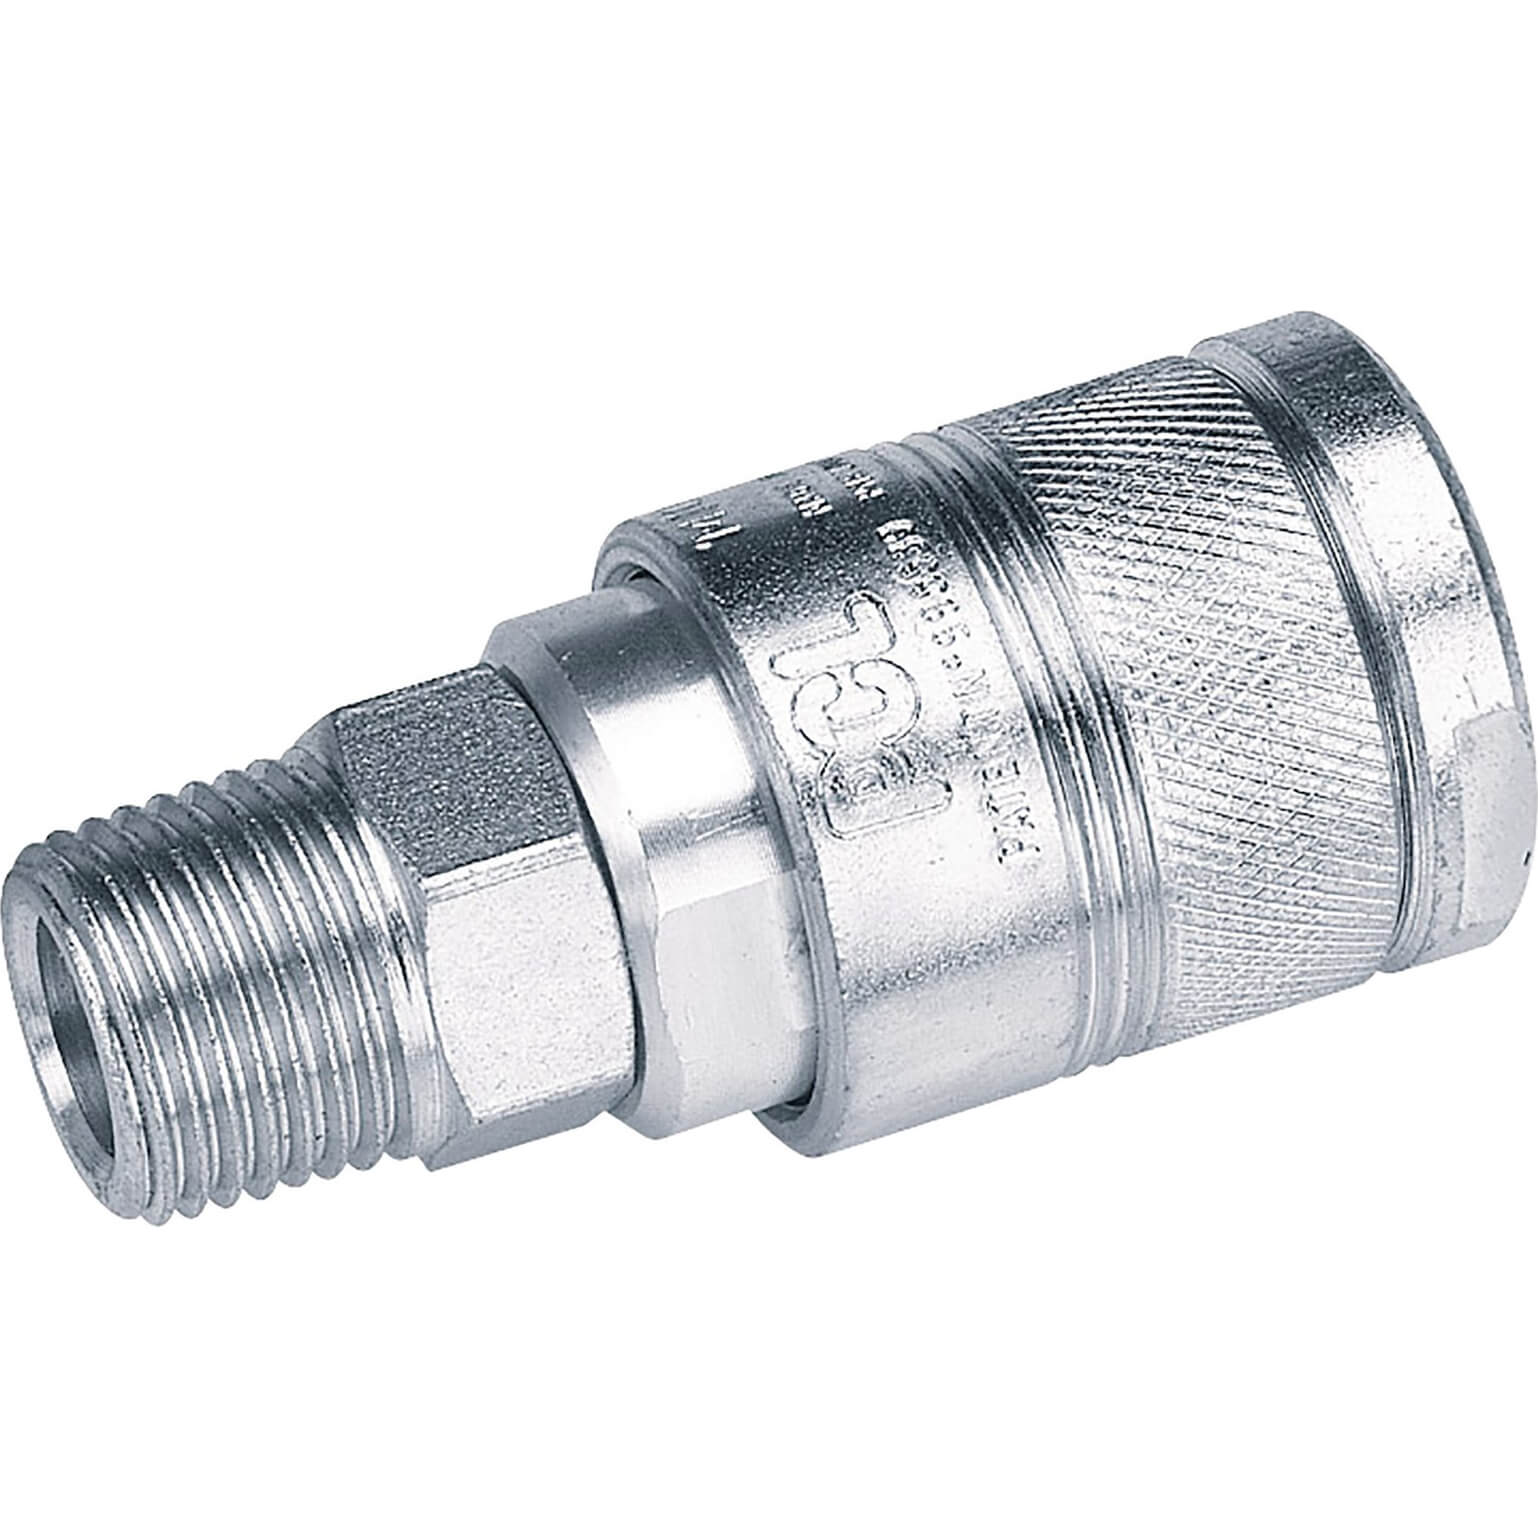 Image of Draper PCL M100 Air Line Coupling Male Thread 1/2" BSP Pack of 1